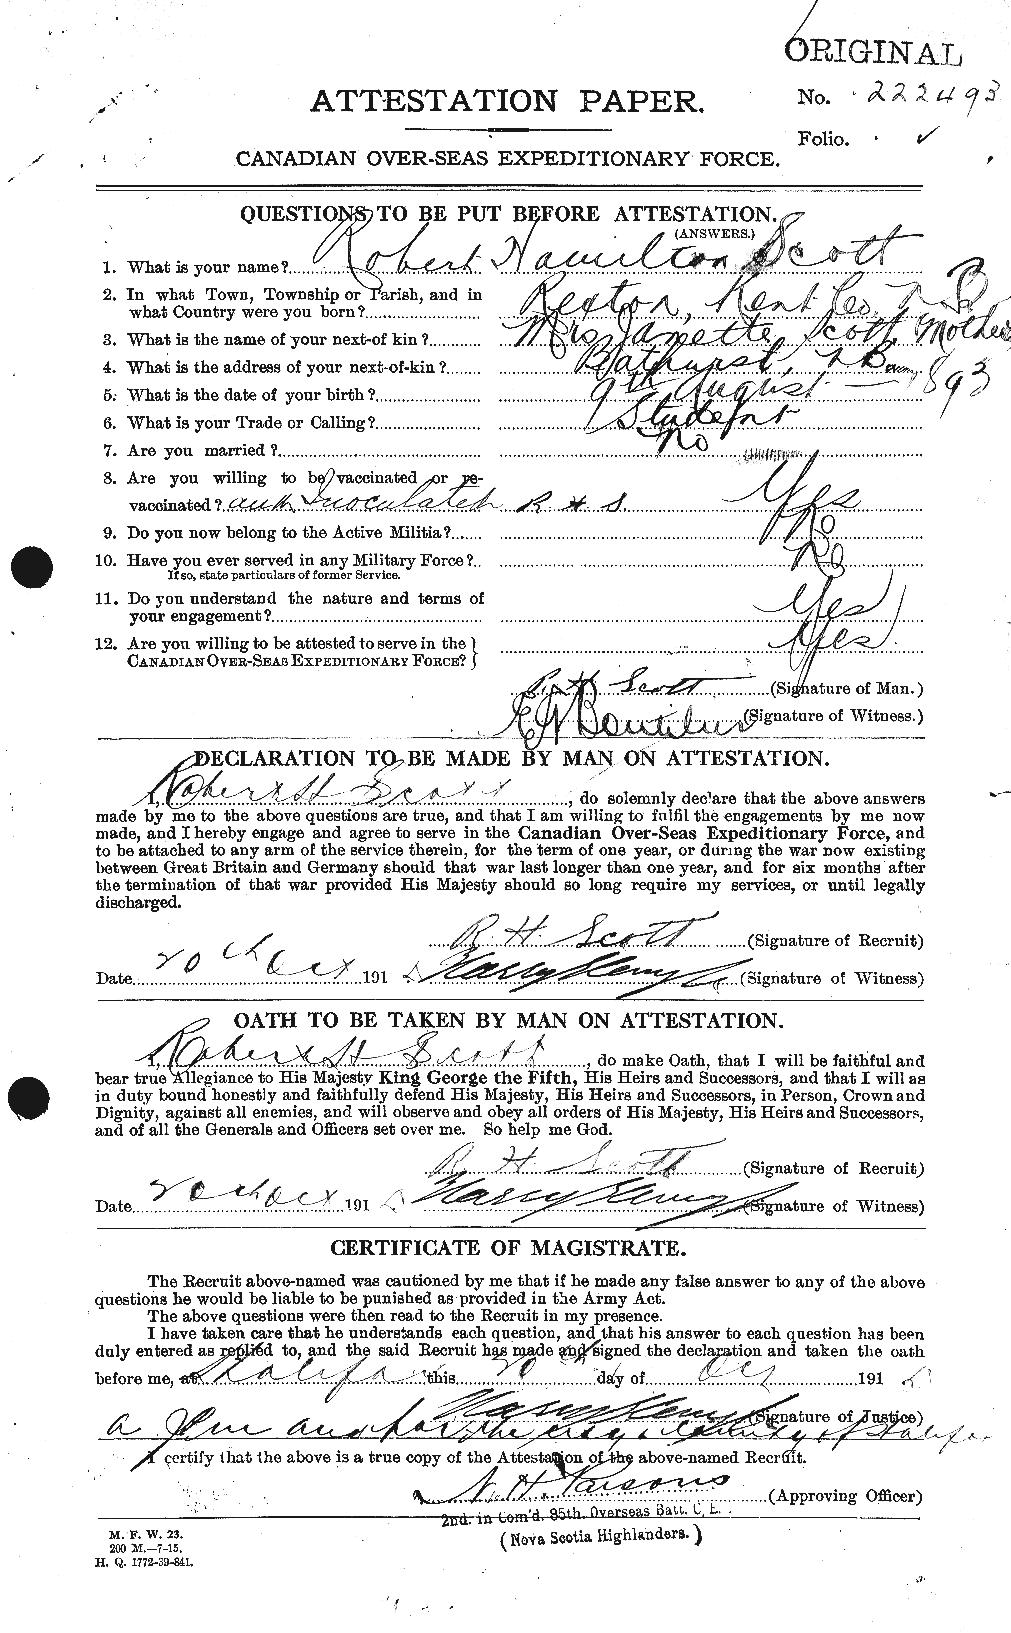 Personnel Records of the First World War - CEF 089137a